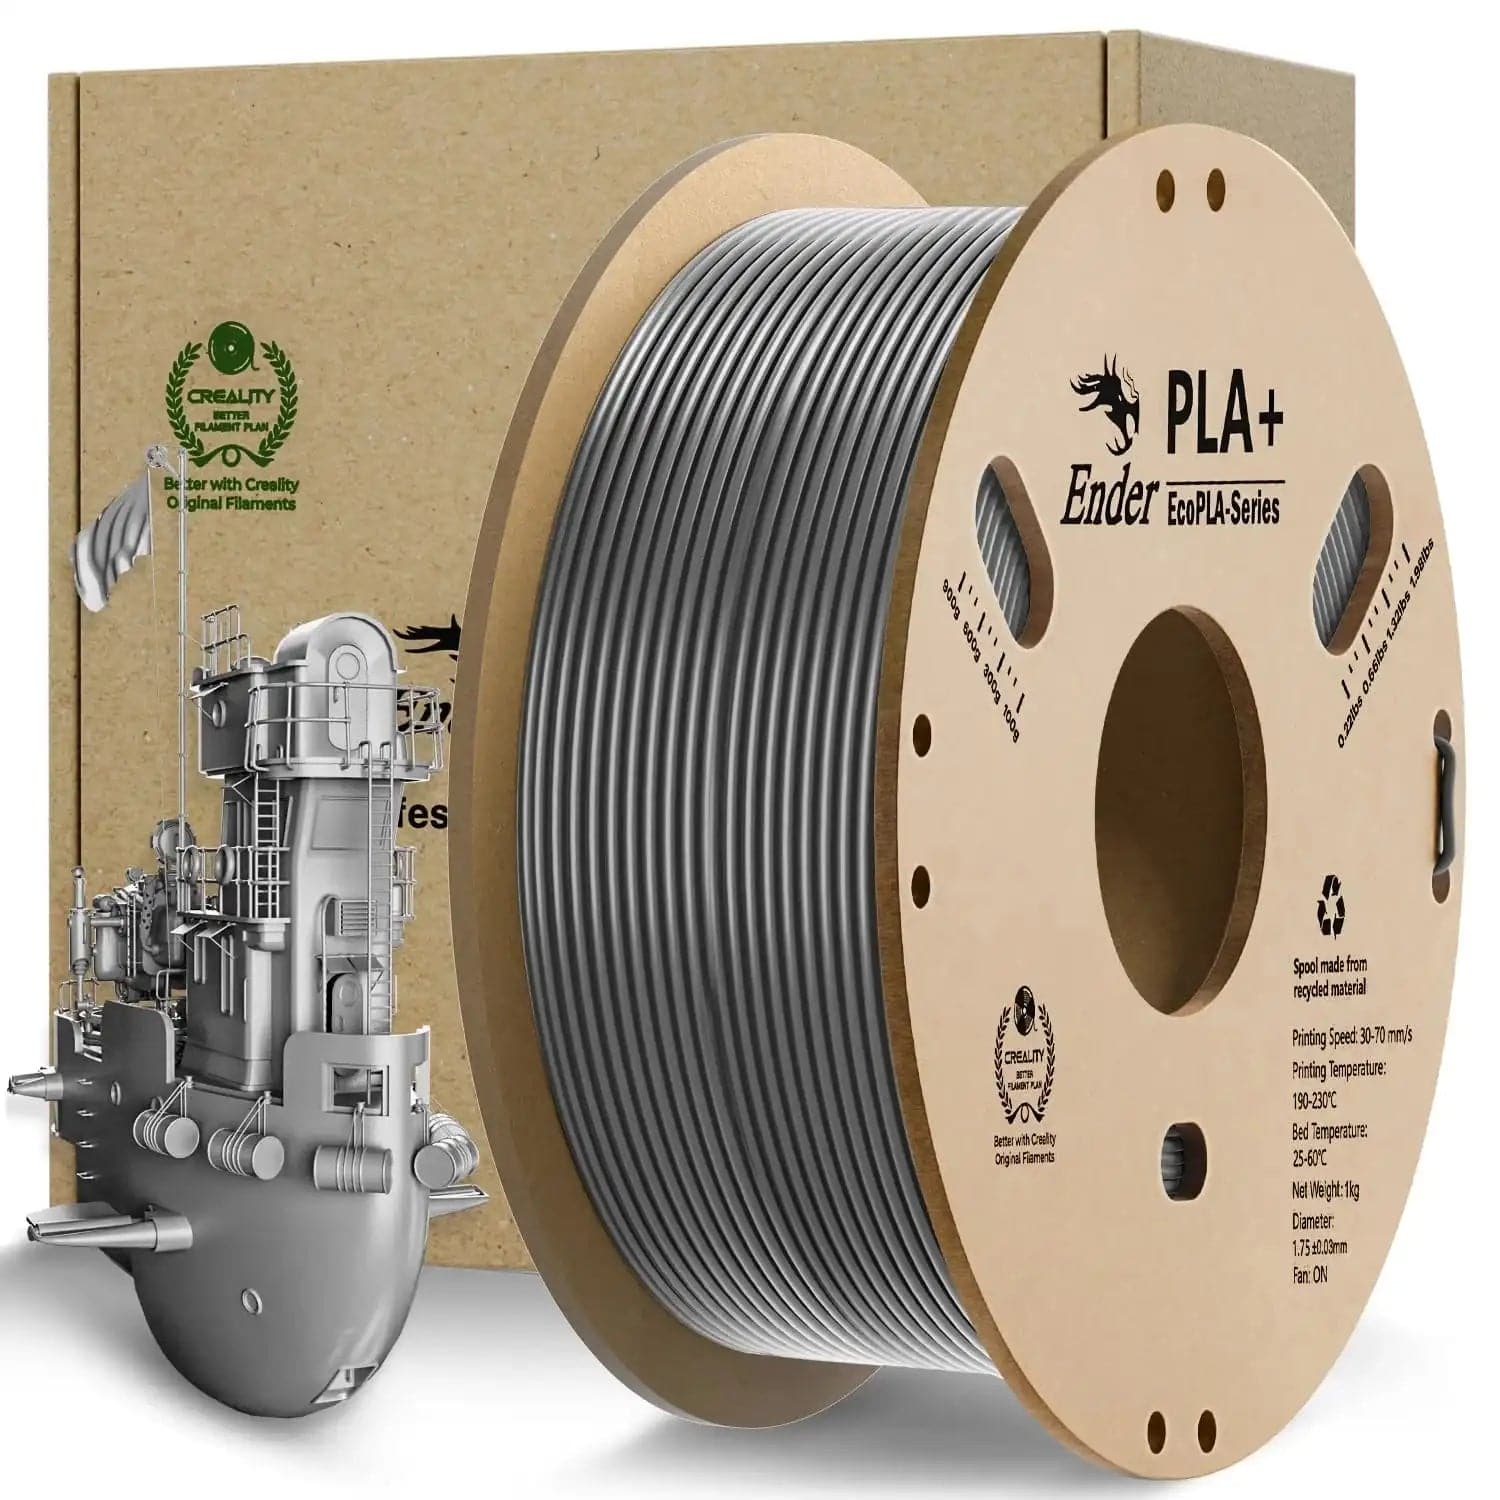 Creality Ender PLA+ 1.75mm 1KG Eco PLA Filament
【Ship From Amazon FBA Warehouse】Same shipping service with Amazon. Enjoy reliable performance and fast shipping with the Amazon FBA Warehouse.
【Creality Quality Ass75mm 1KG Eco PLA Filament3D Printing Materials